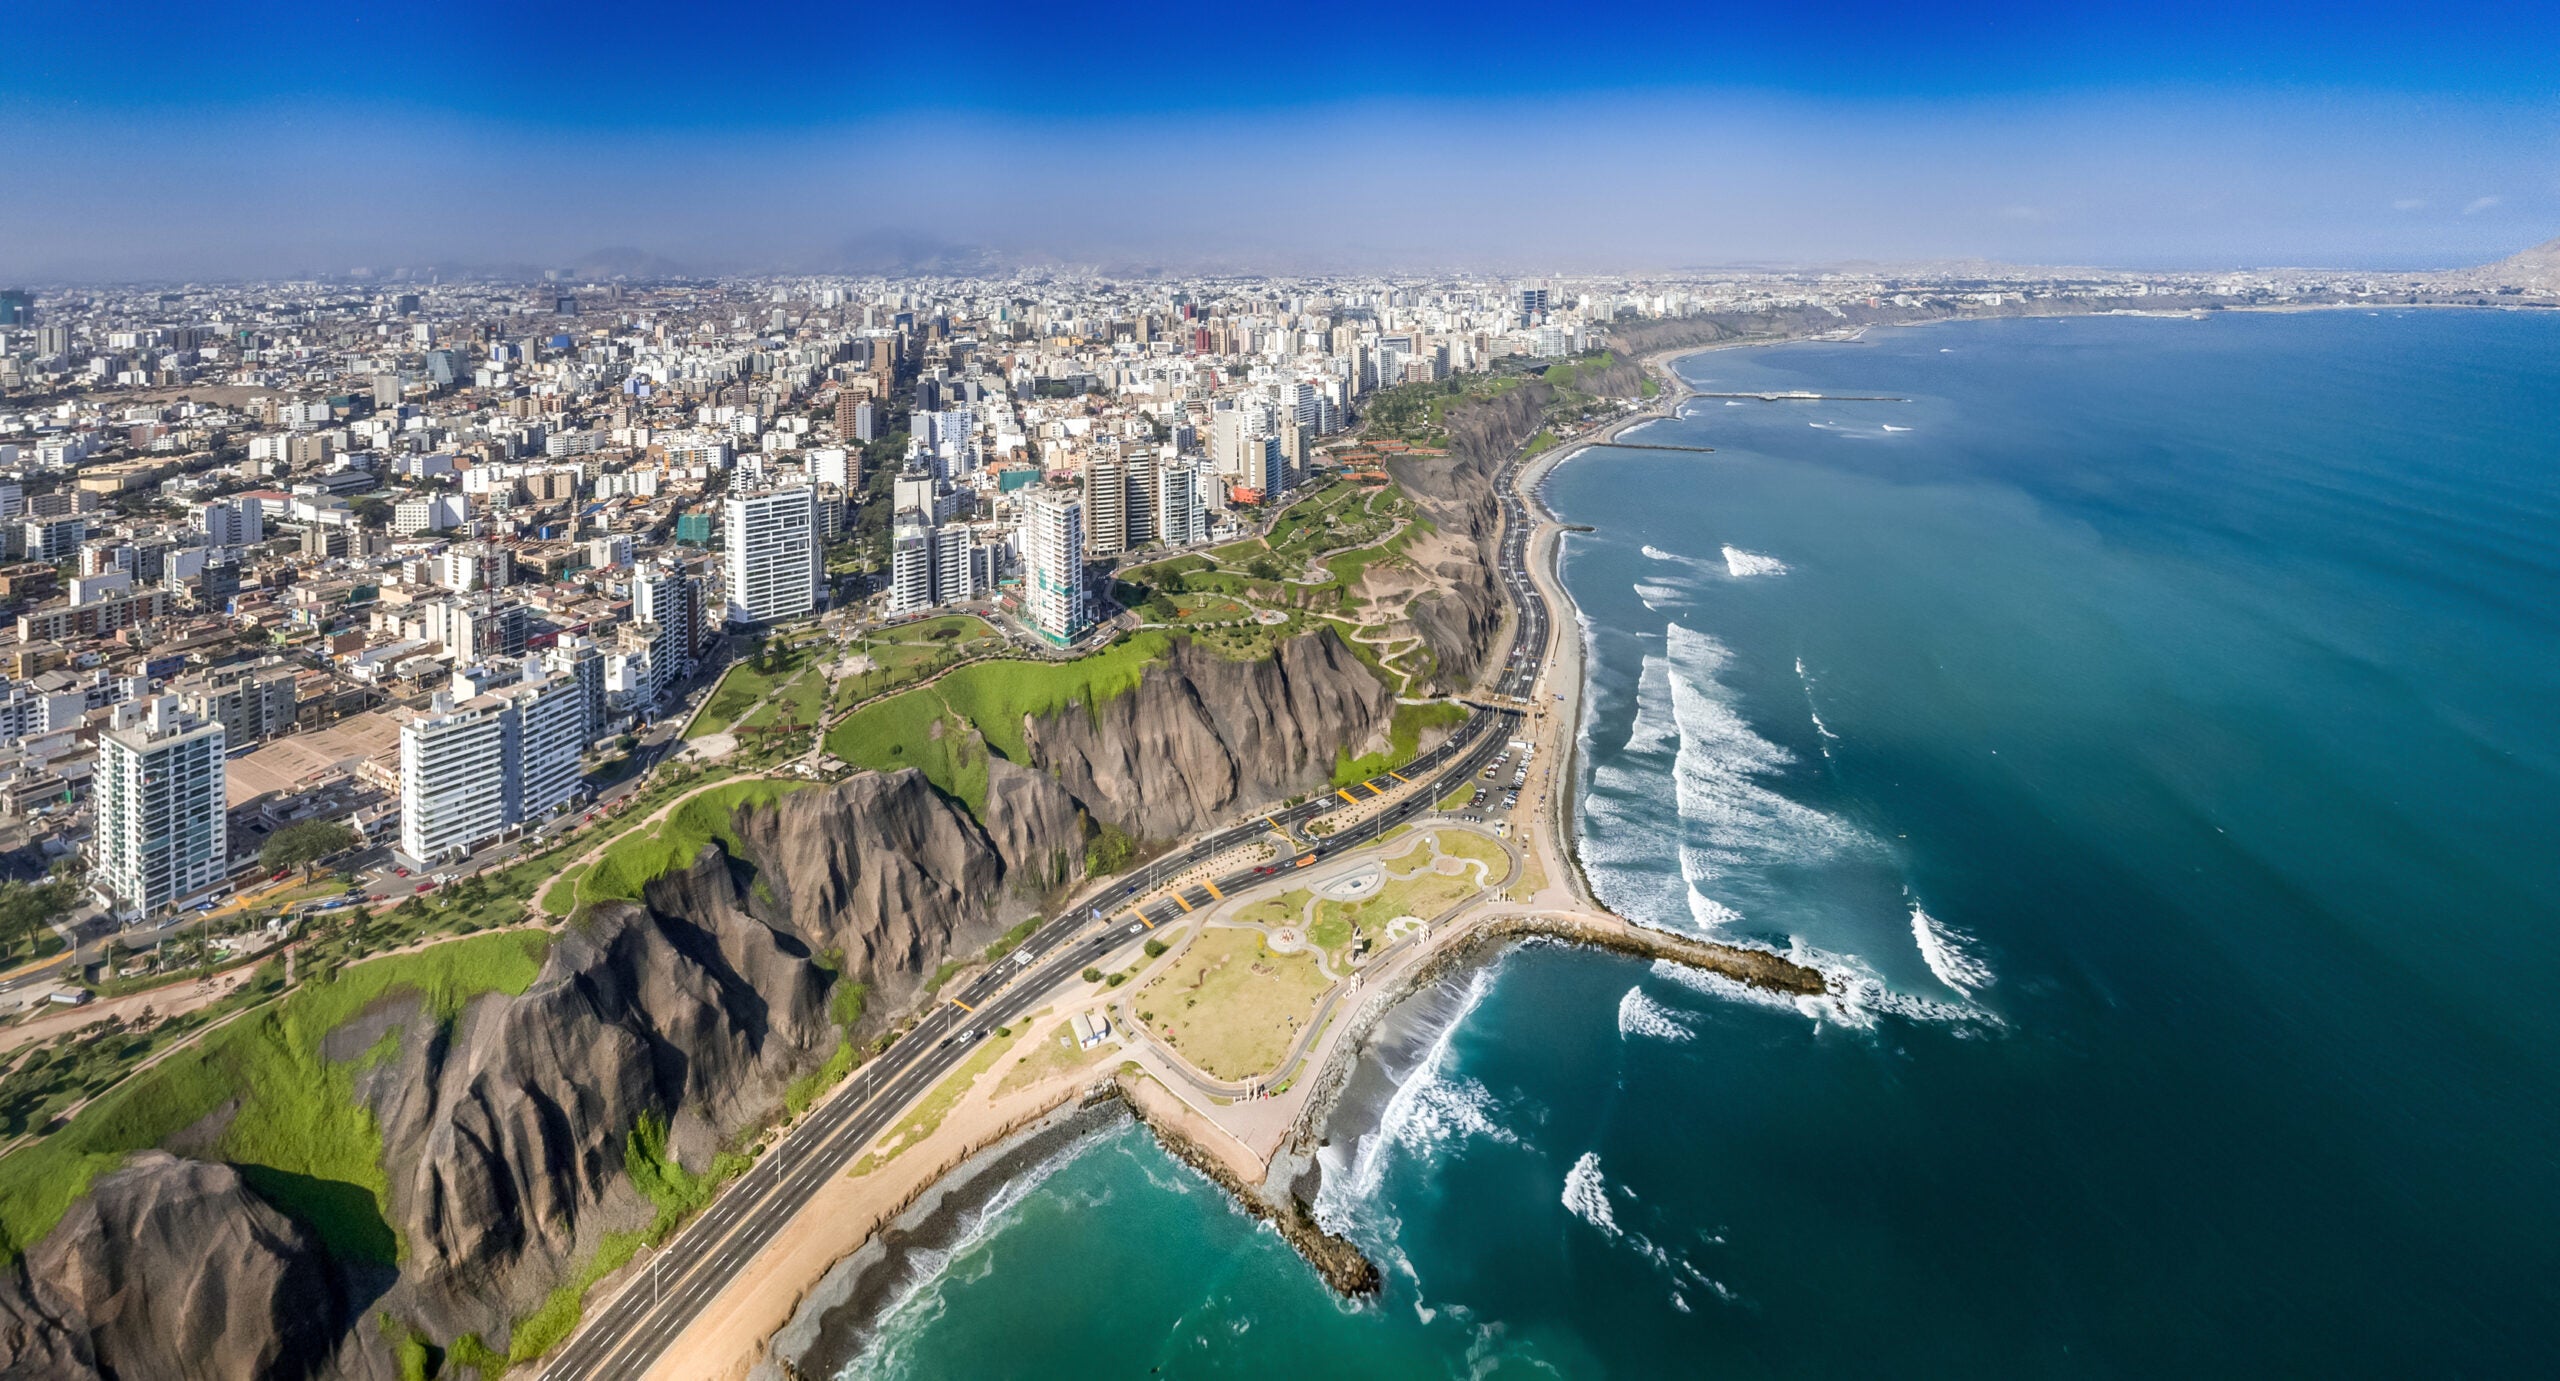 Lima,,Peru:,Aerial,View,Of,Miraflores,Town,,Cliff,And,The